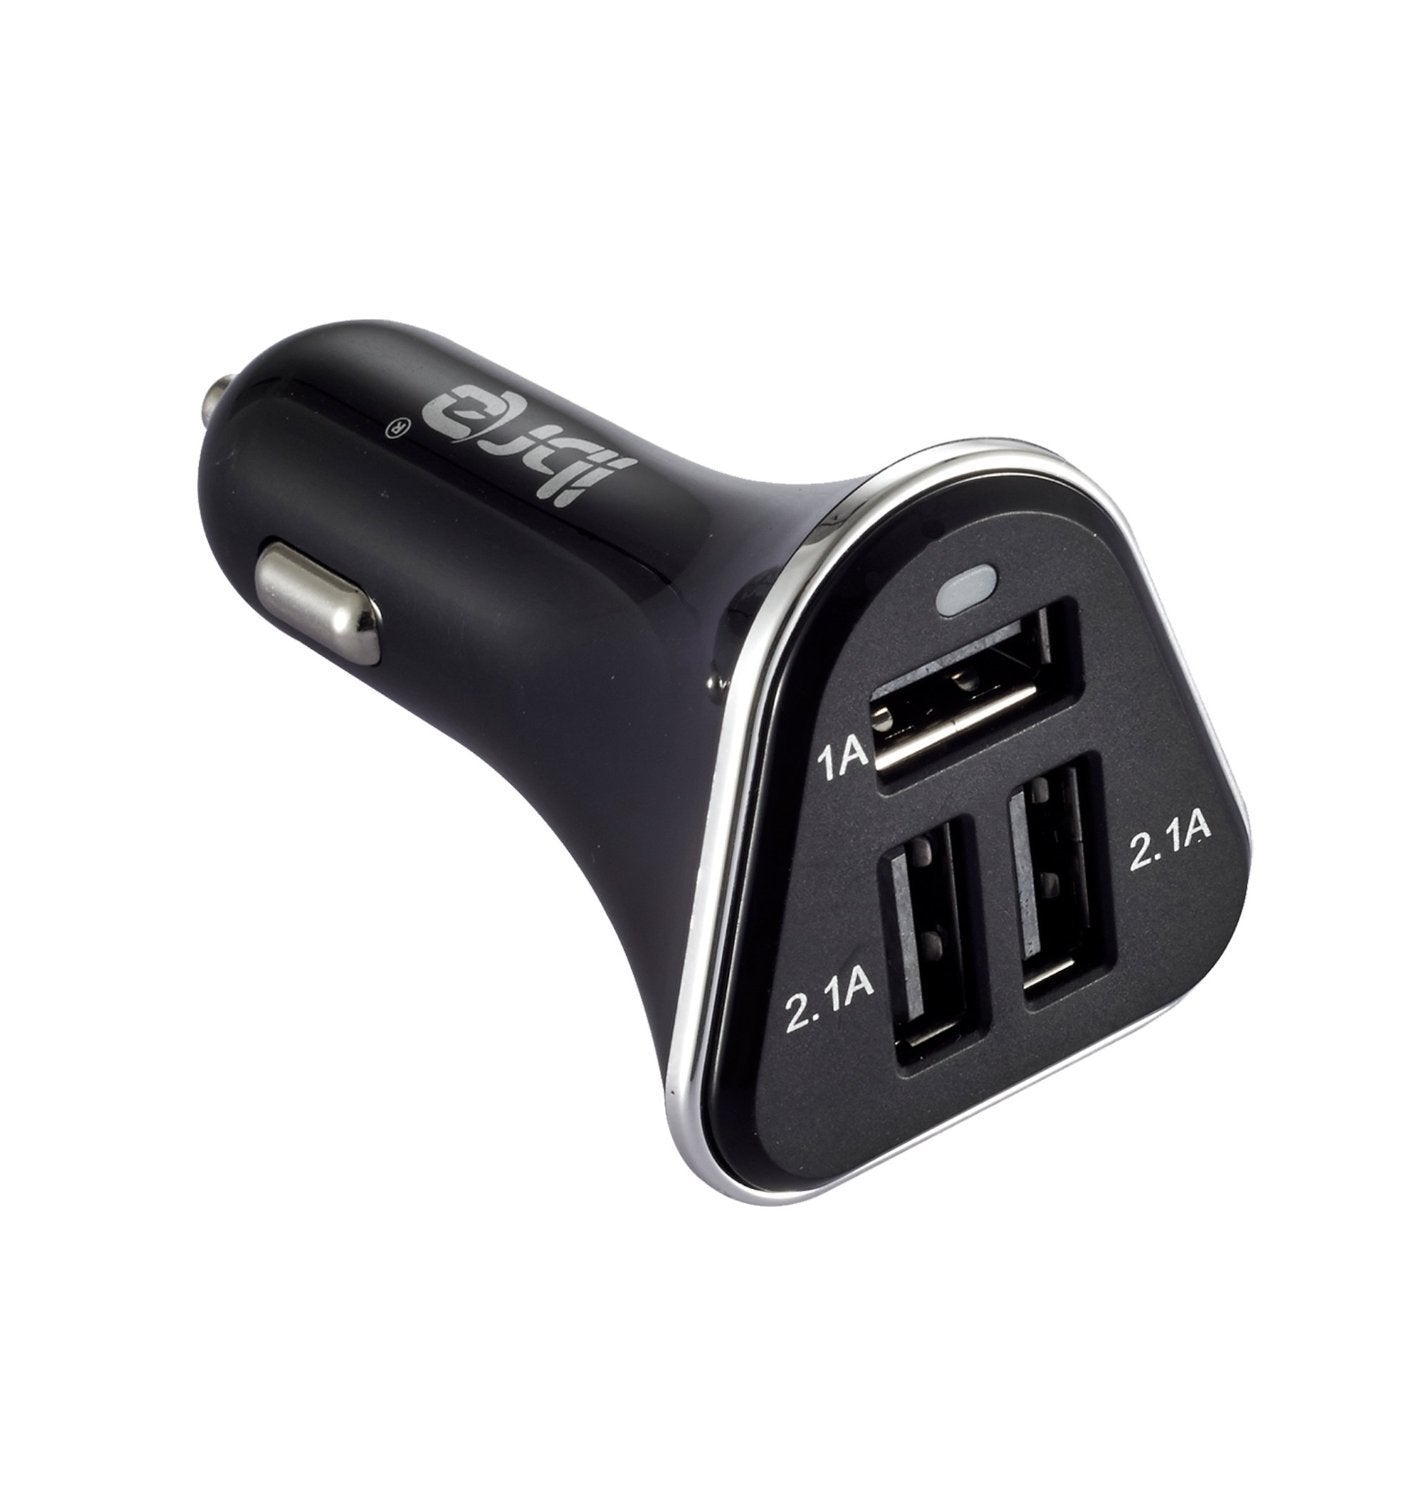 IBRA Car Charger, 3-Port 5.1A(2.1A 2A 1A) Aluminum Panel Rapid USB Car Charger for iPhone 6 6 Plus iPhone 5/5s/5c iPhone 4 4S iPad 1 2 3 iPad mini iPad Air iPod 5th iPod classic iPod nano iPod touch Samsung Galaxy Smartphones Tablets Android Smartphones